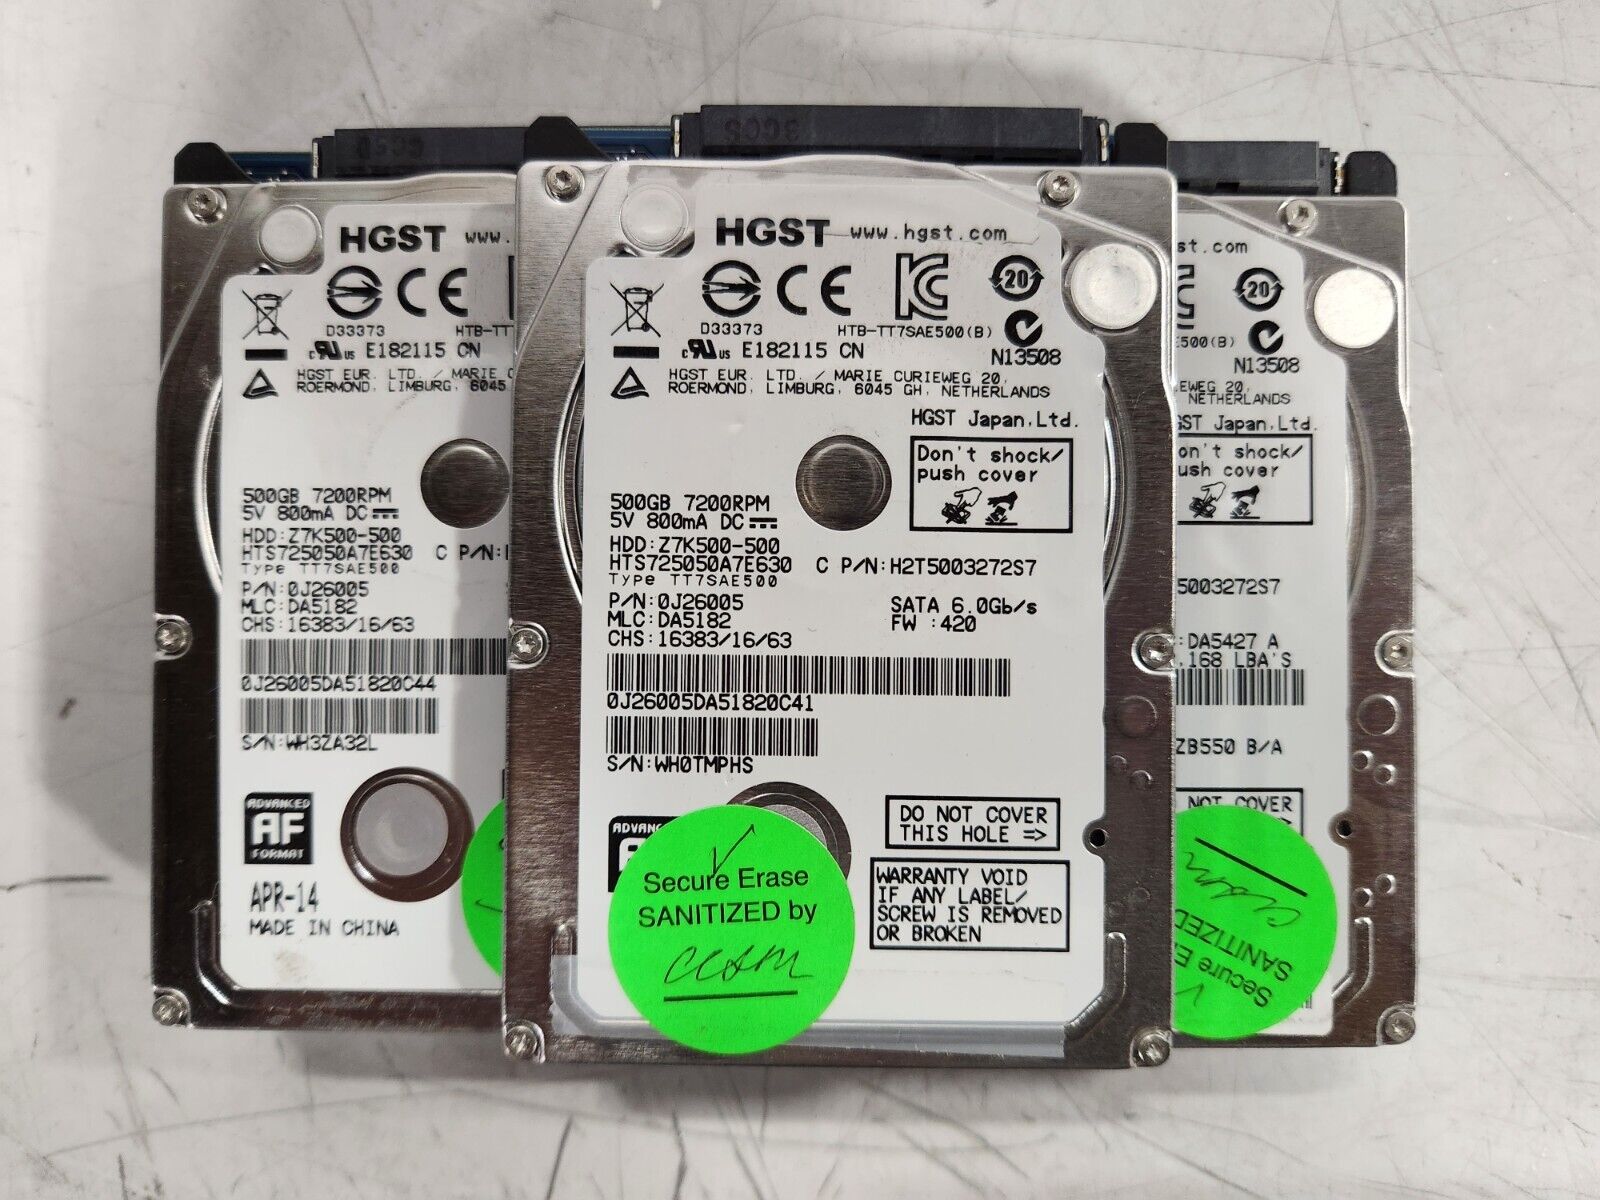 LOT OF 13 Mixed Seagate HDD's